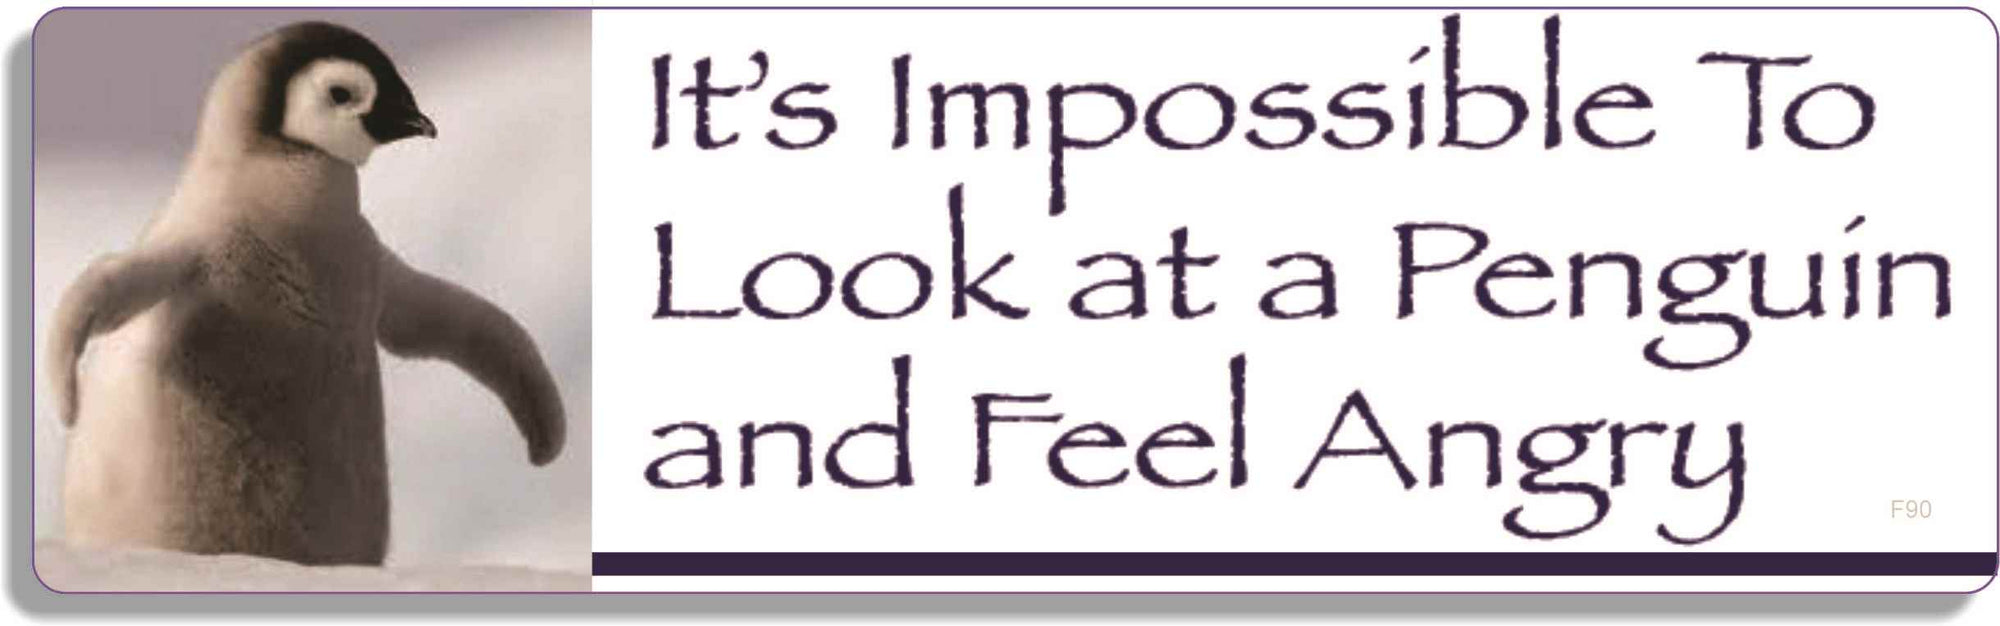 It's impossible to look at a penguin and feel angry - 3" x 10" Bumper Sticker--Car Magnet- -  Decal Bumper Sticker-funny Bumper Sticker Car Magnet It's impossible to look at a penguin-  Decal for cars funny, funny quote, funny saying